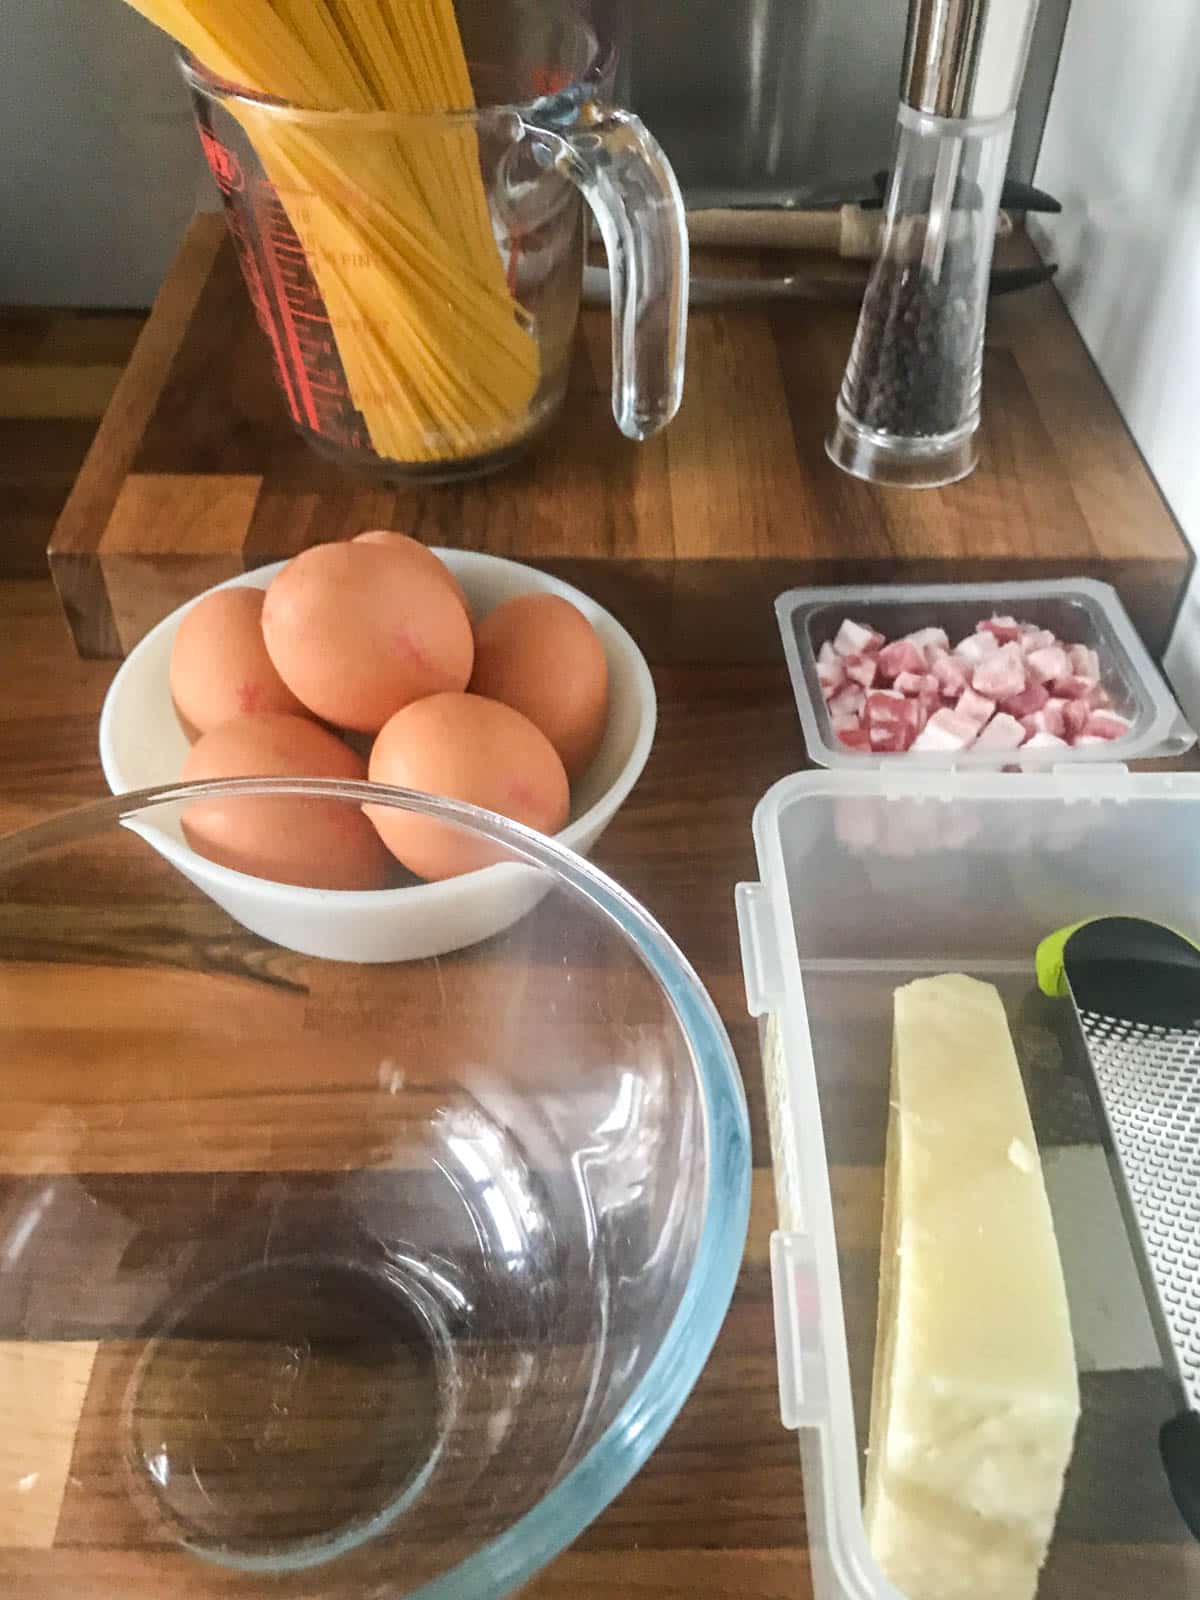 Ingredients portioned in containers - Spaghetti, eggs, pancetta and pecorino romano